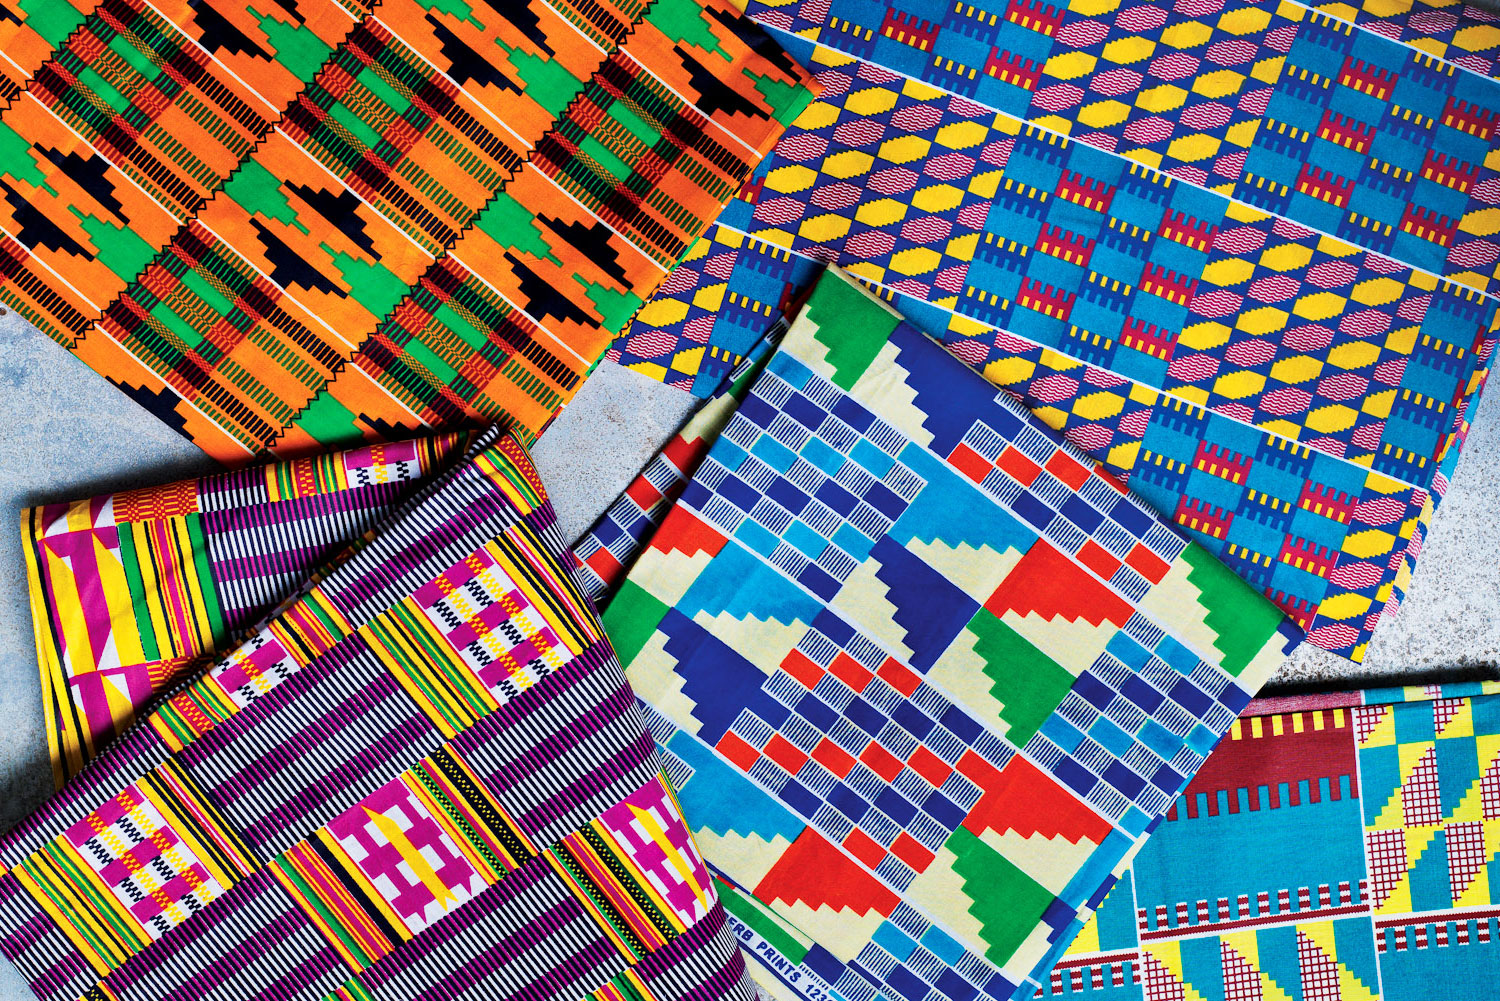 Traditional Kente cloth from Ghana.